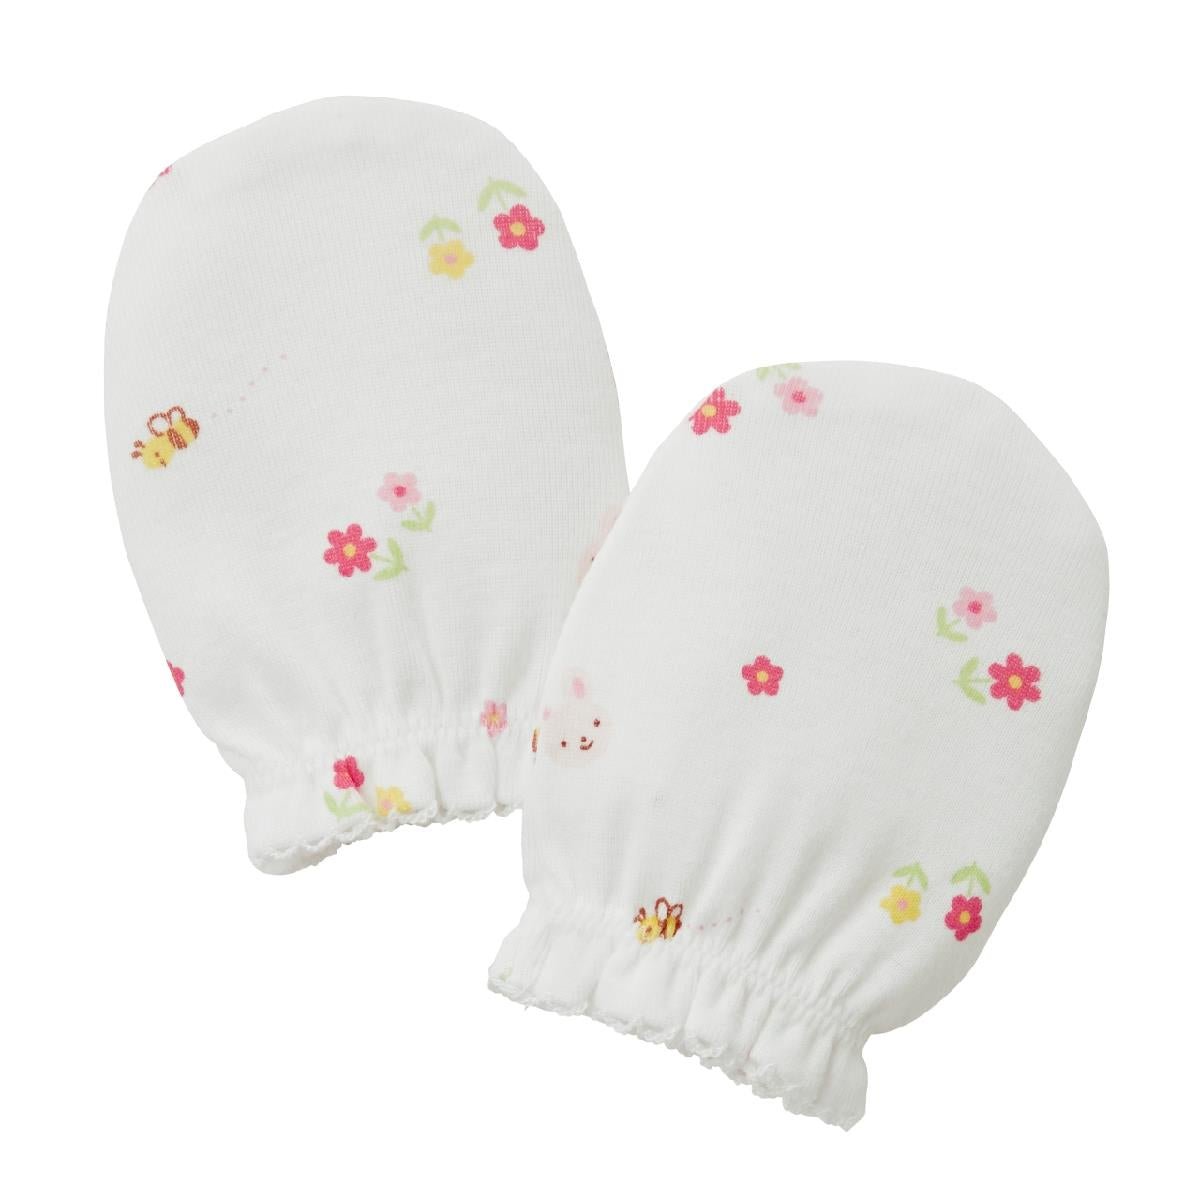 Floral Delight Baby Gift Set - MIKI HOUSE USA